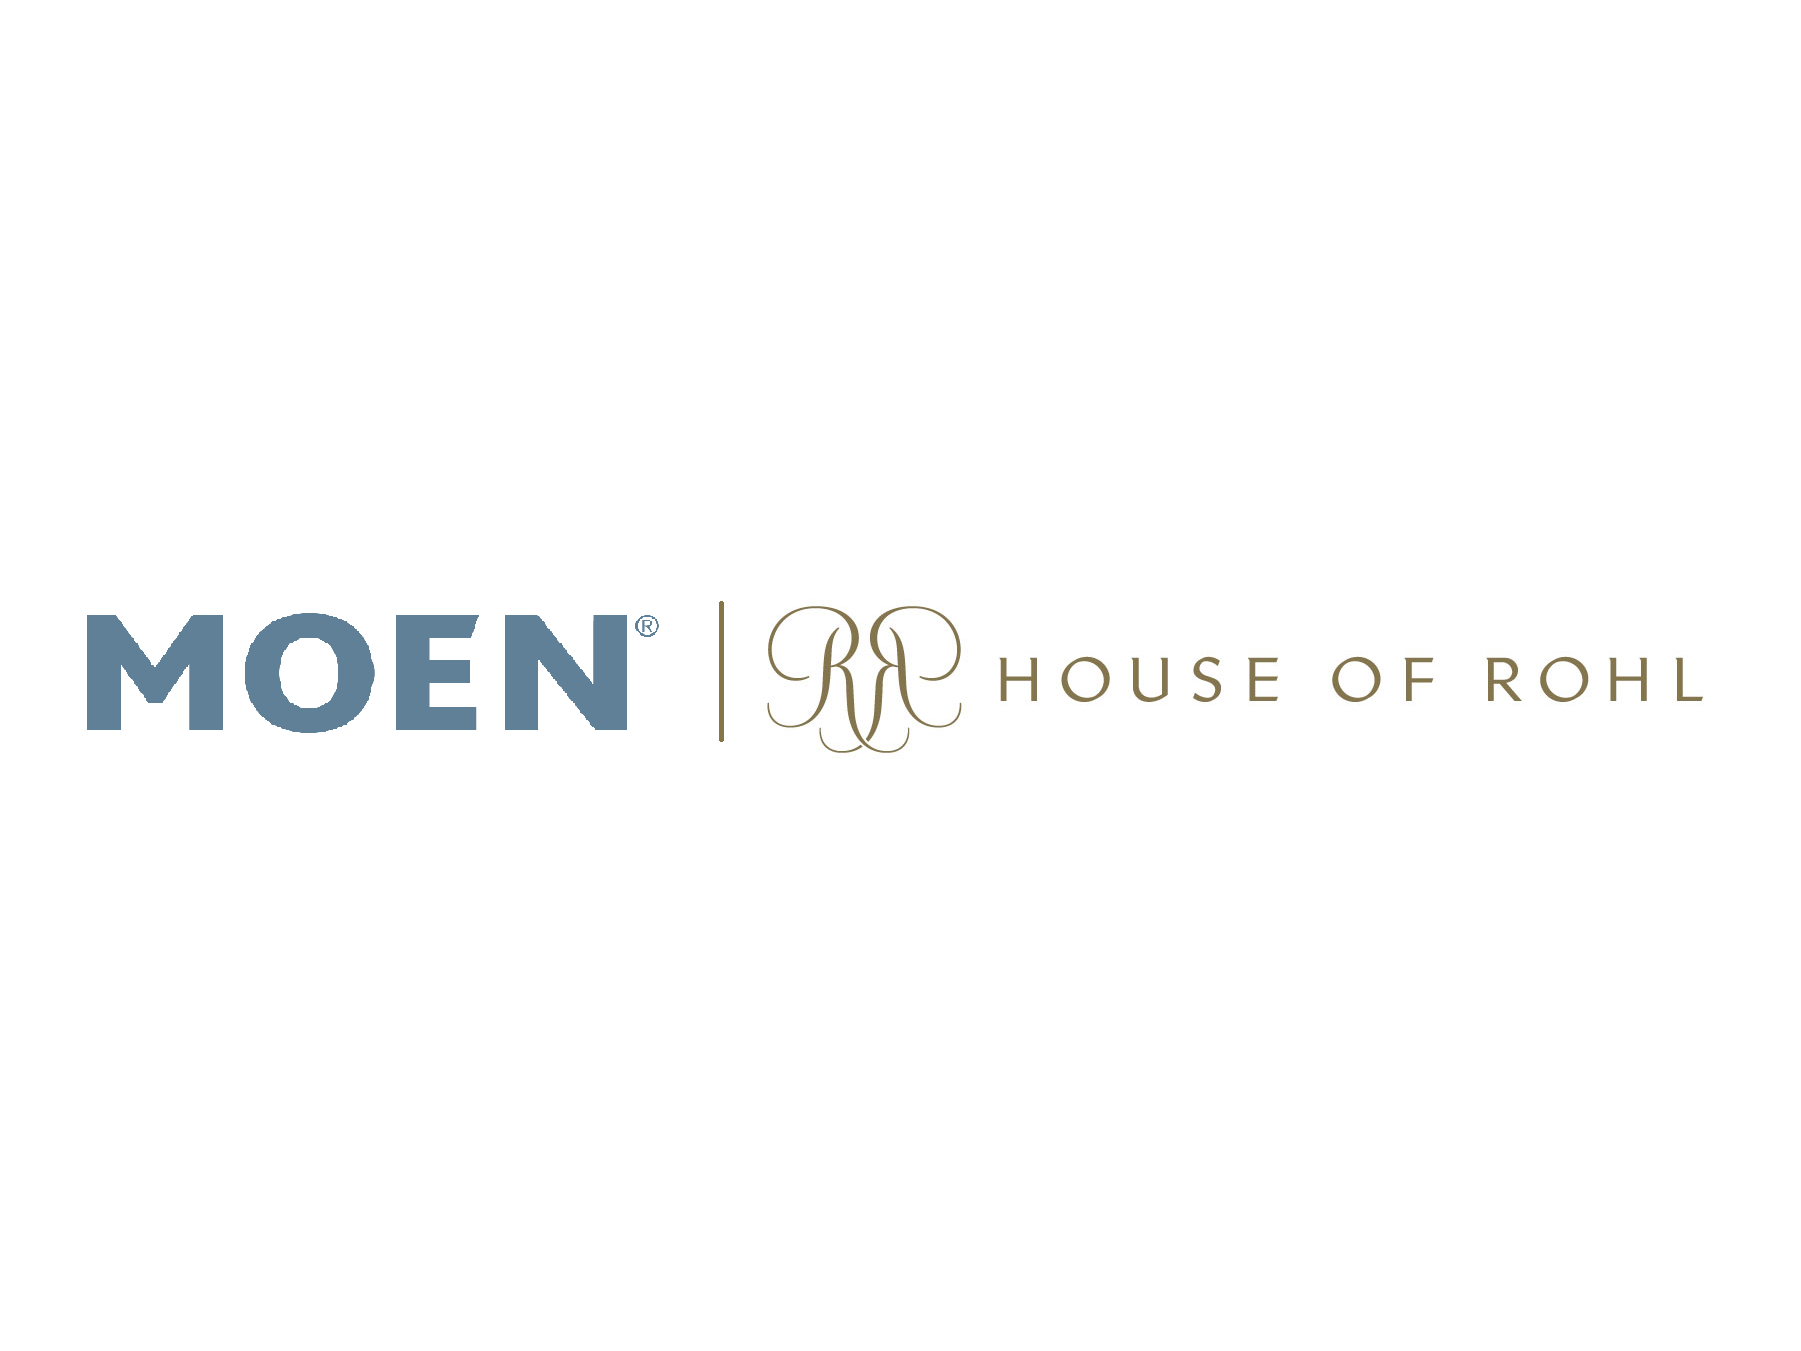 Moen House of Rohl 2018.png